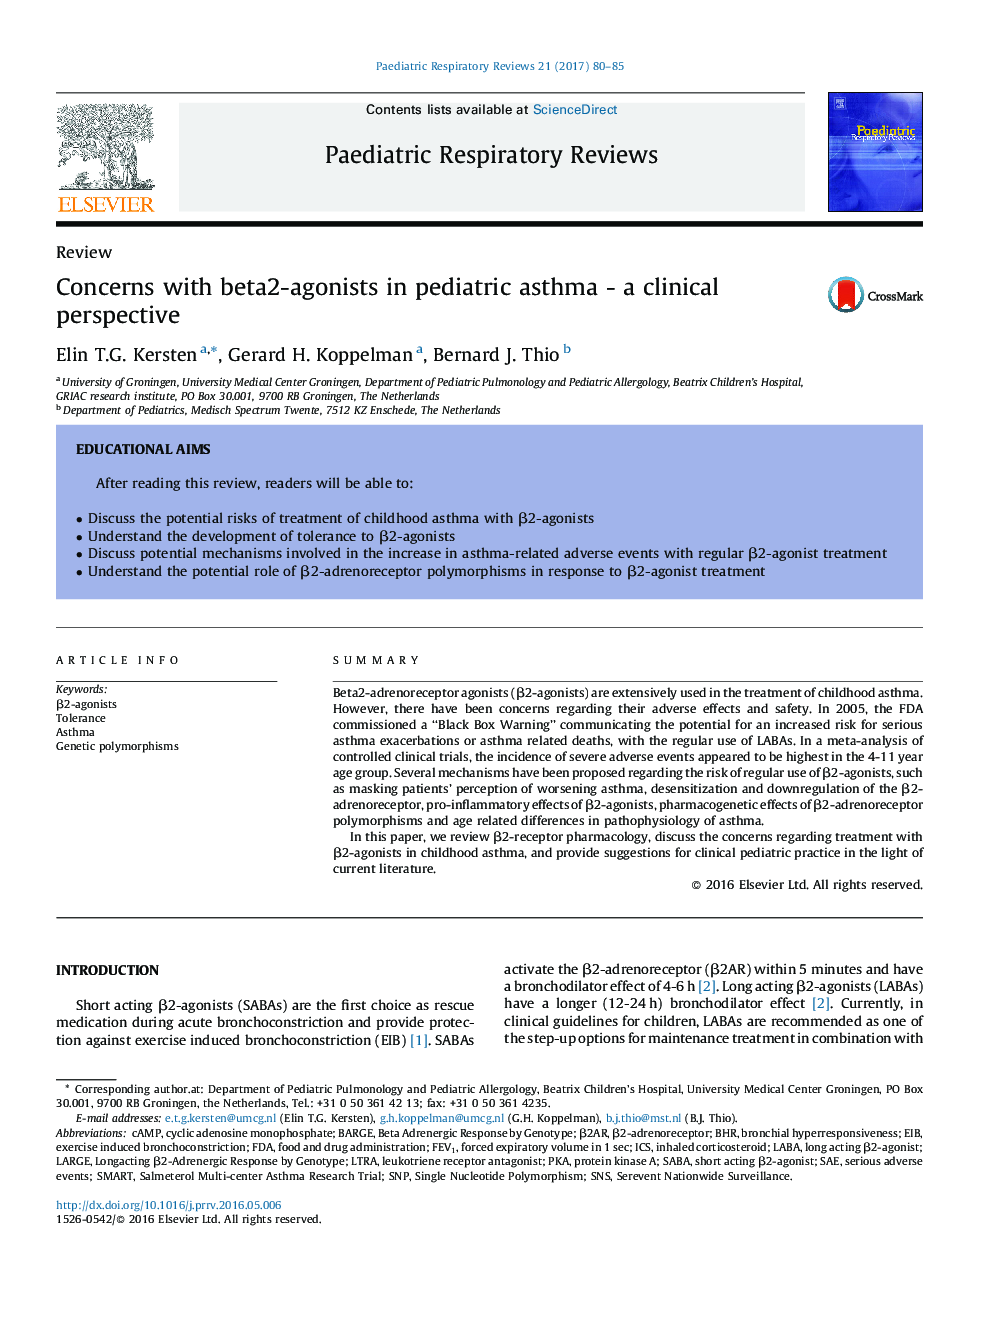 ReviewConcerns with beta2-agonists in pediatric asthma - a clinical perspective